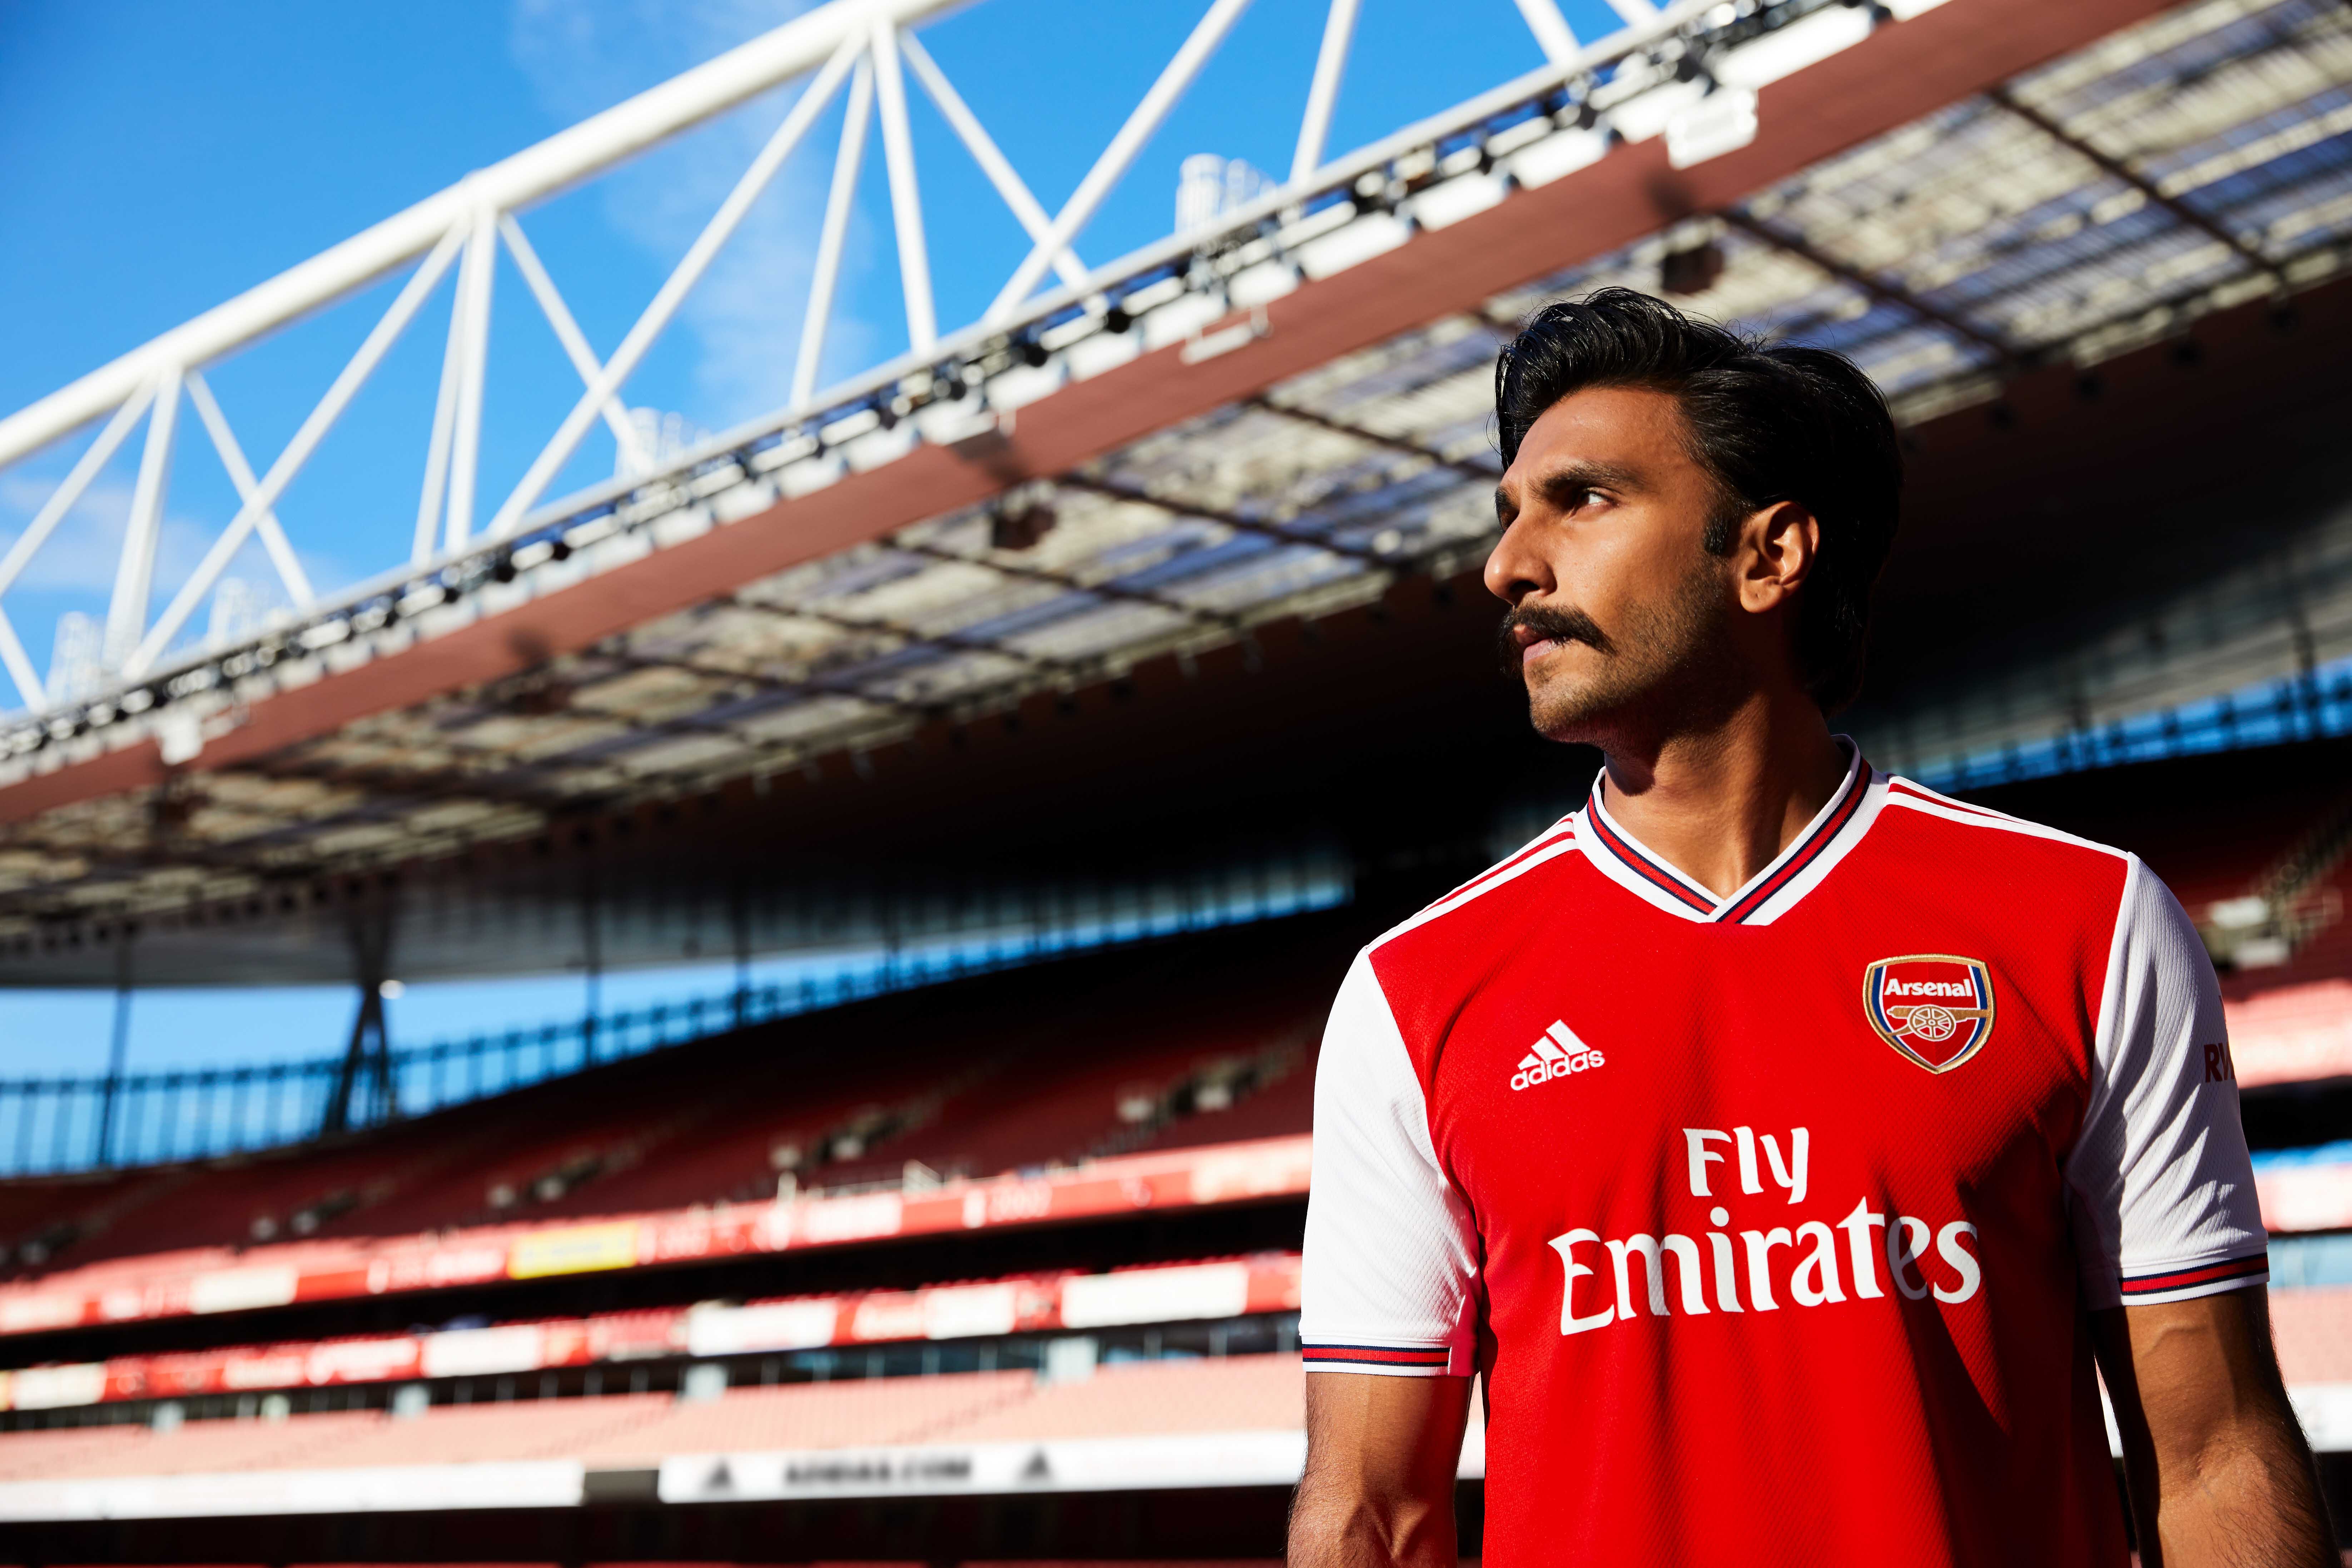 Ranveer Singh a true gunner at heart-launched adidas’ home kit 2019/20 for his favourite club Arsenal